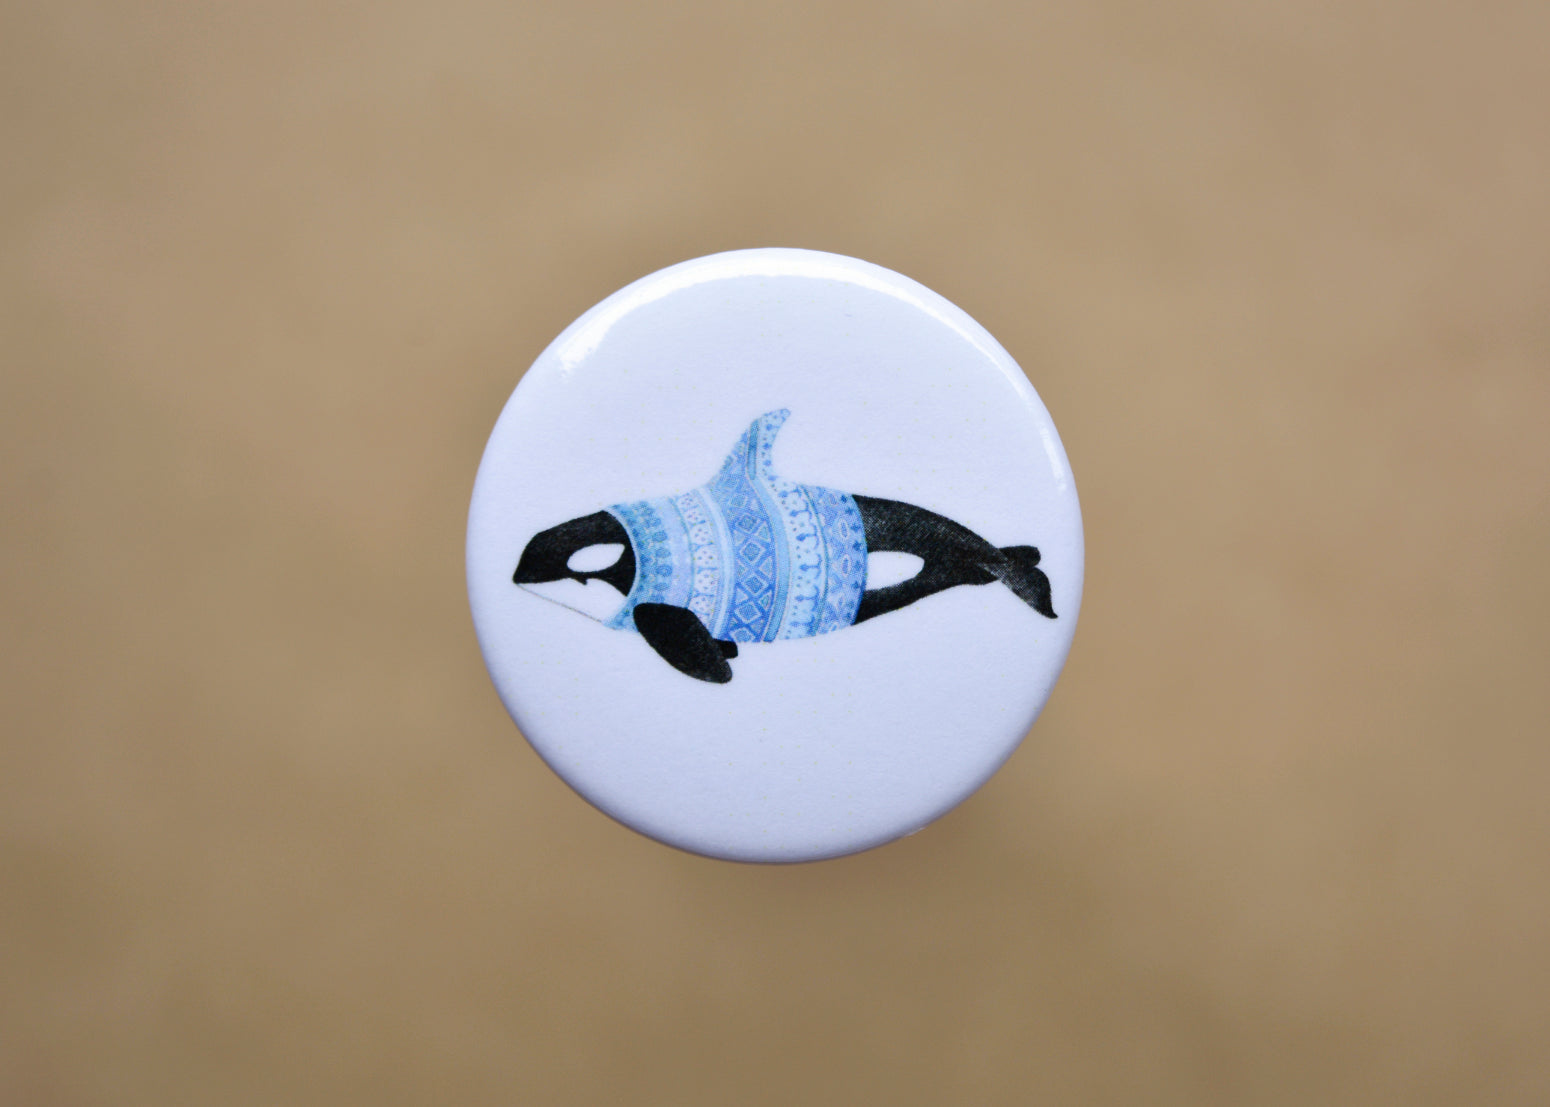 Ink drawing of a humpback whale wearing a blue sweater on a pin-backed button.